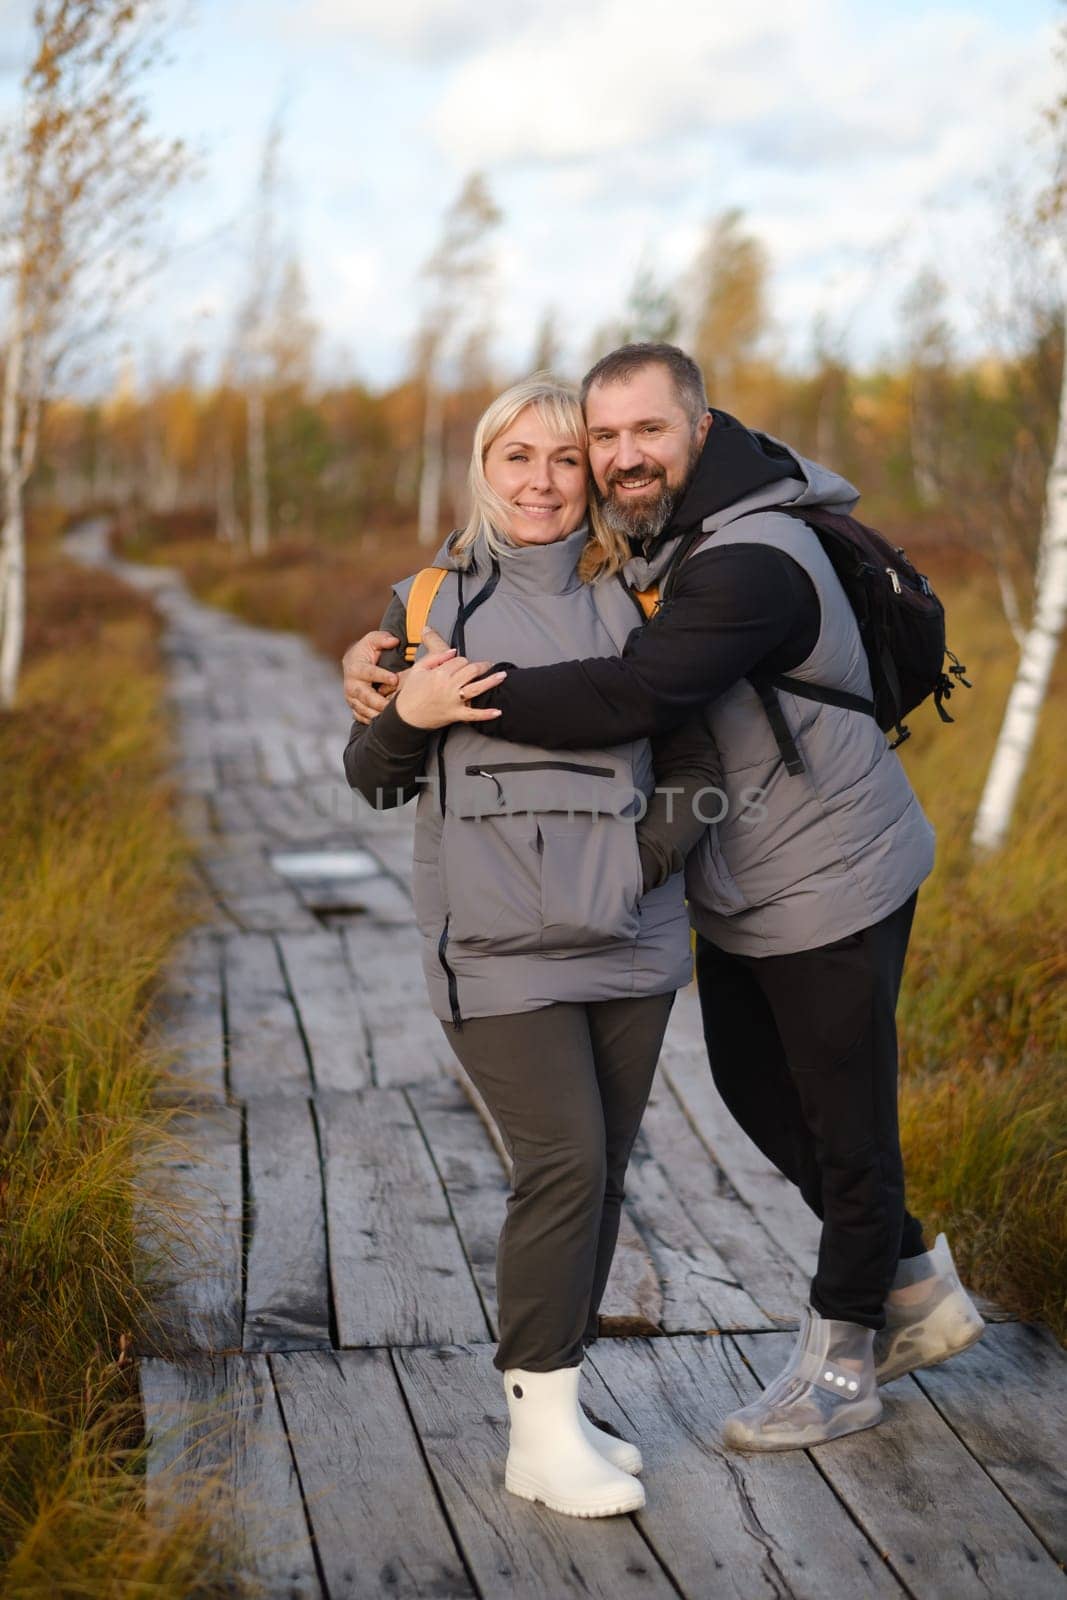 People in boots stand hugging on a wooden path in a swamp in Yelnya, Belarus.